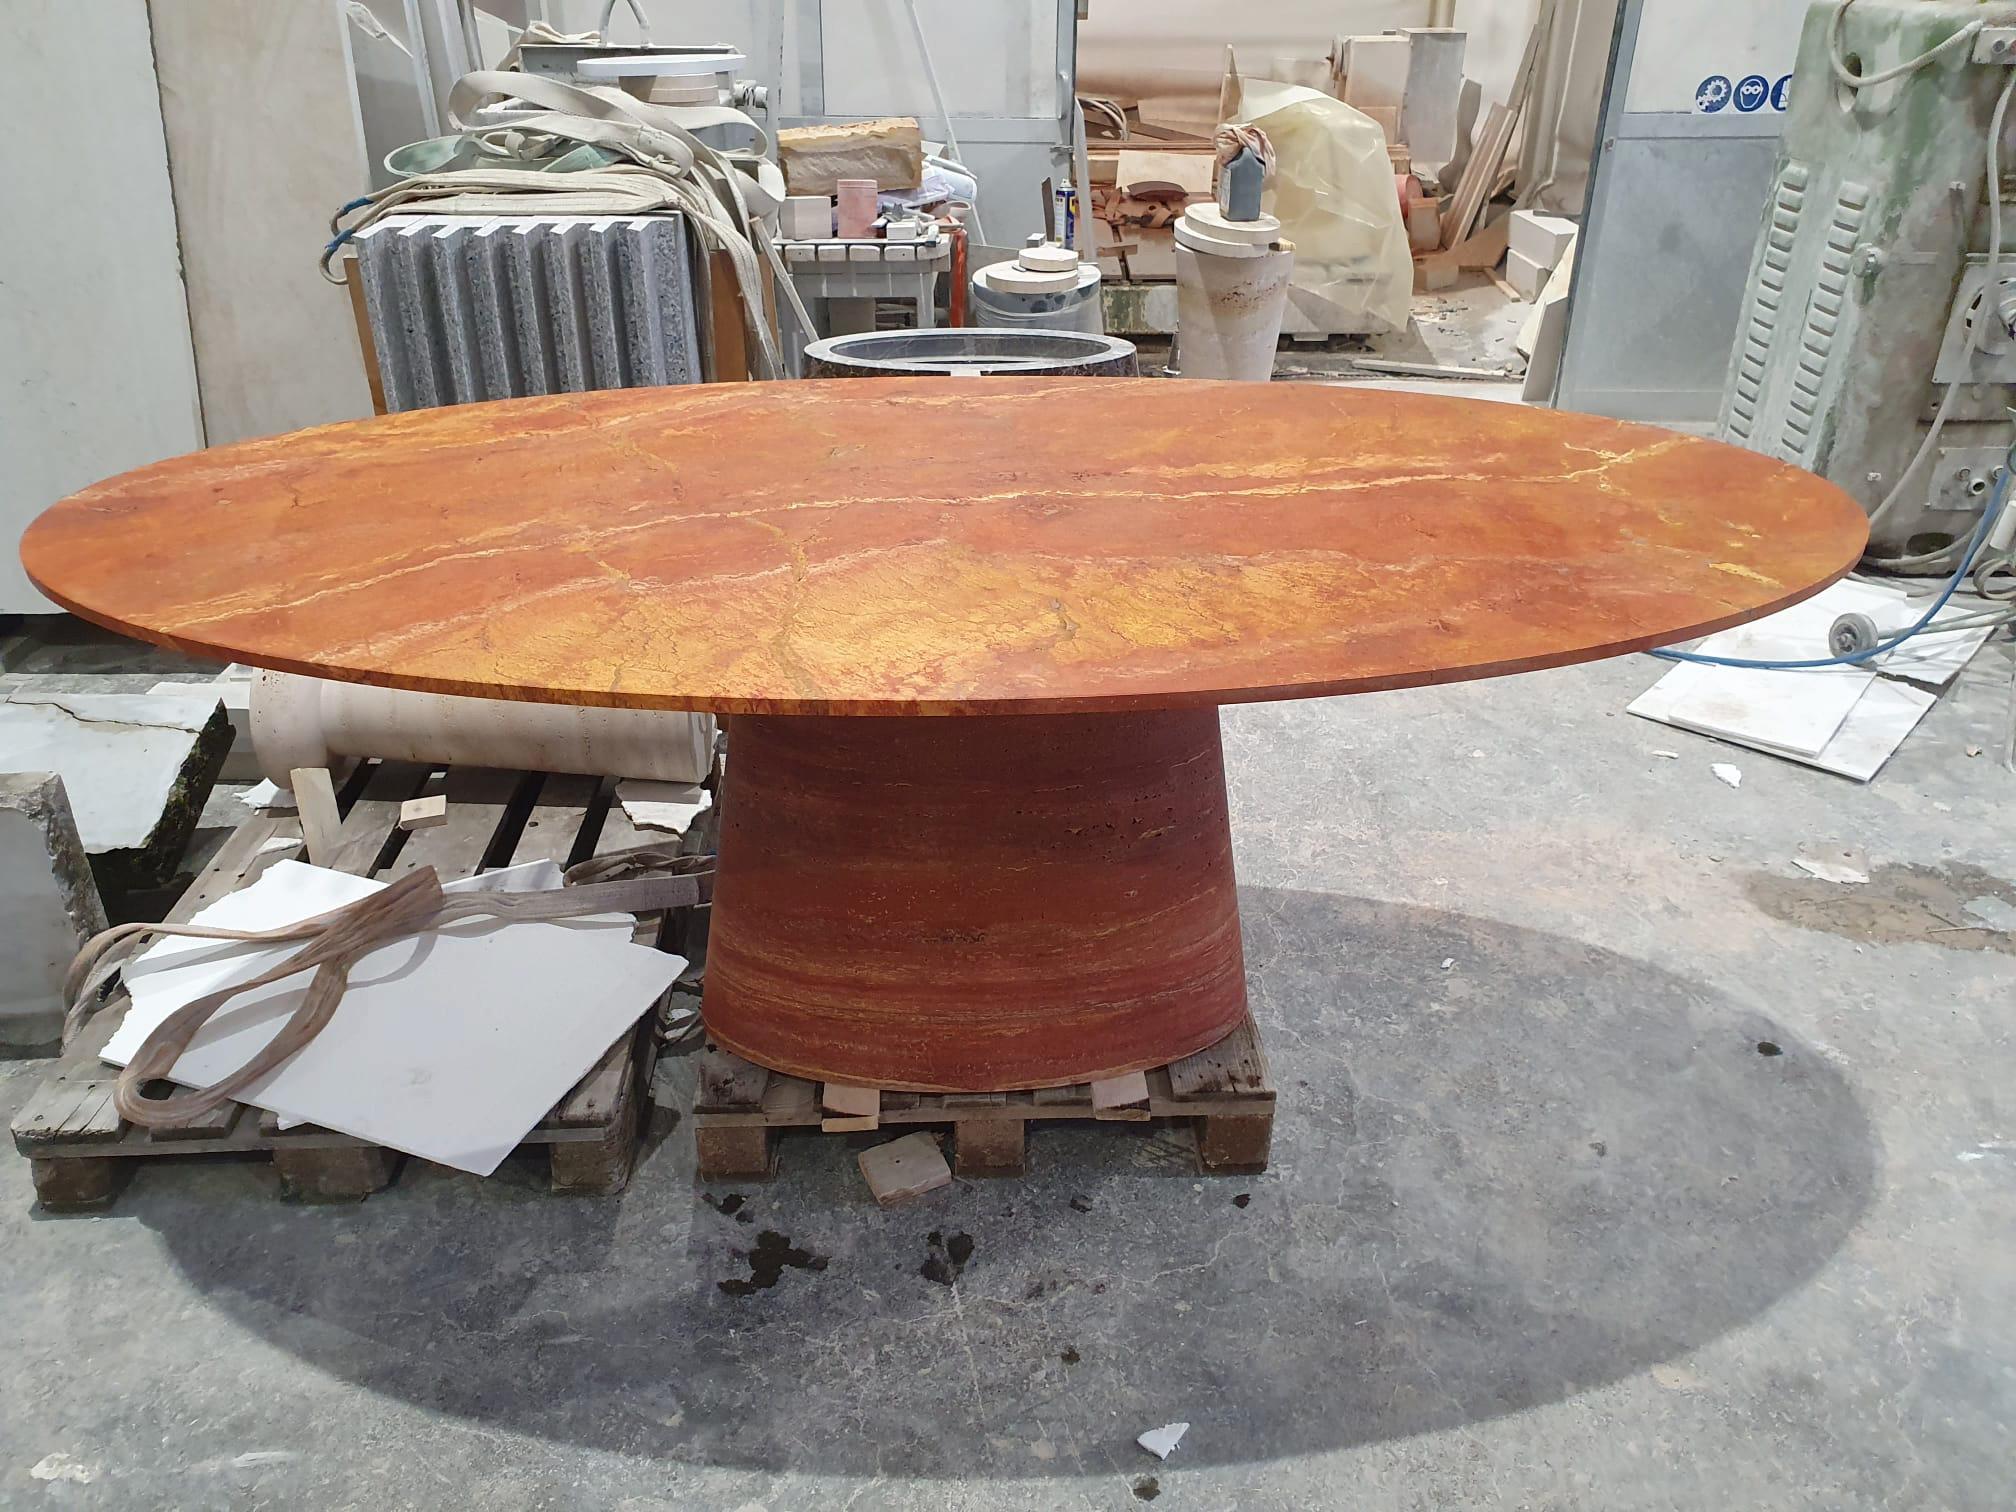 Italian Made To Order Red Travertine Dining Table For Sale